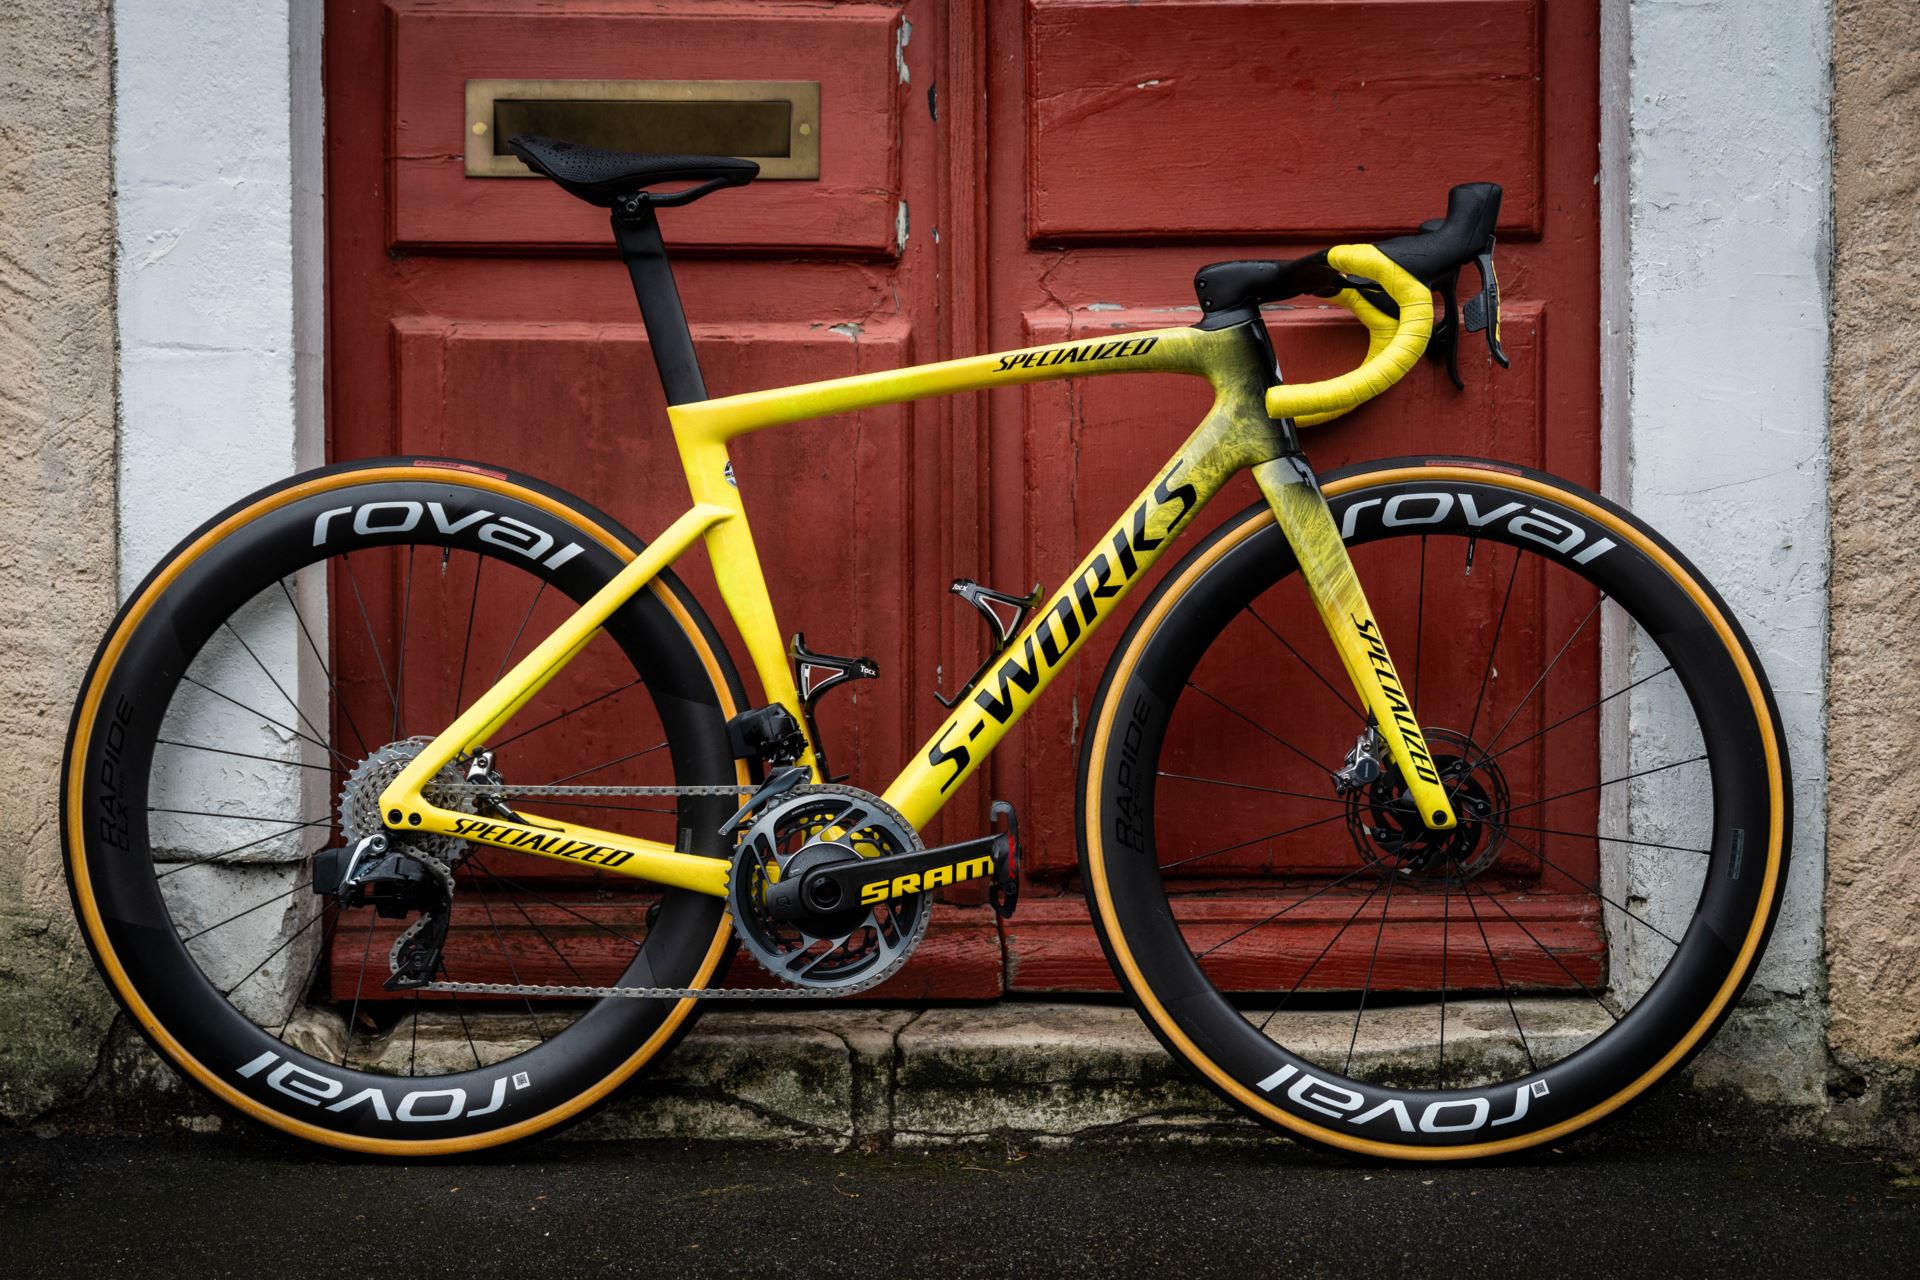 Demi Vollering's Specialized Tarmac with RED eTap AXS